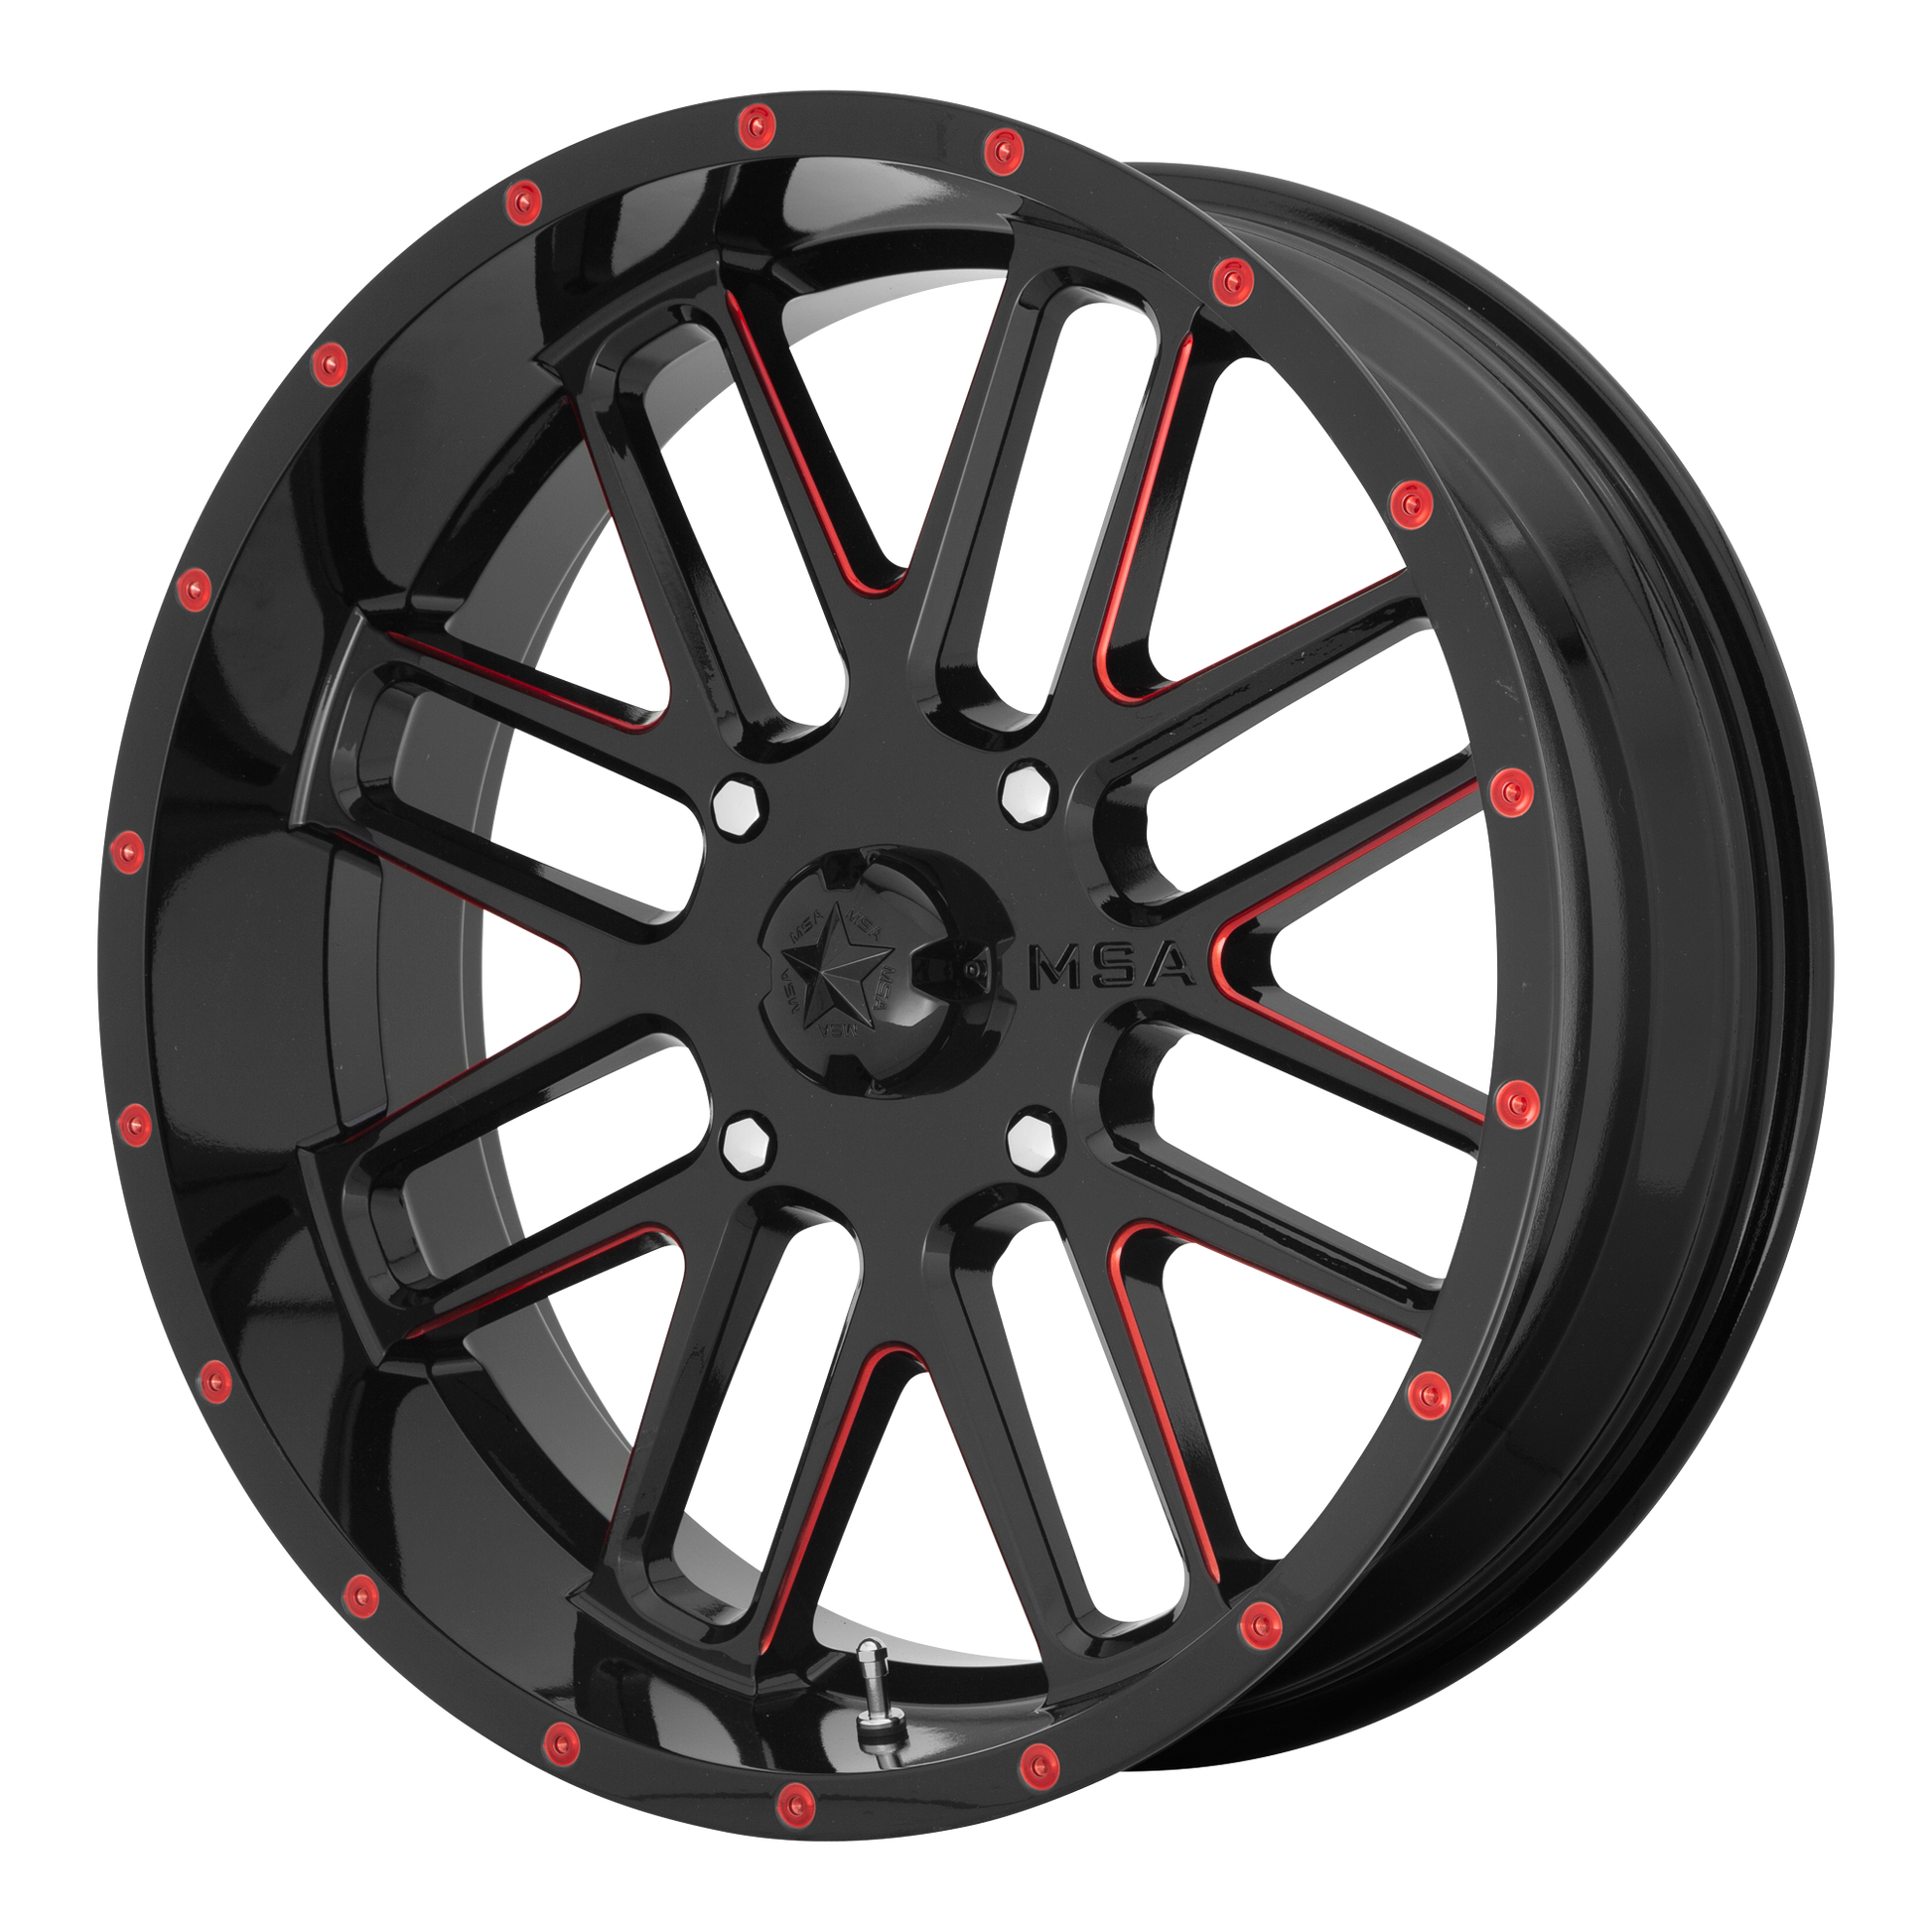 Msa Offroad Wheels M35 Bandit 22x7 22x7 0 Offset In Gloss Black Milled W/ Red Tint